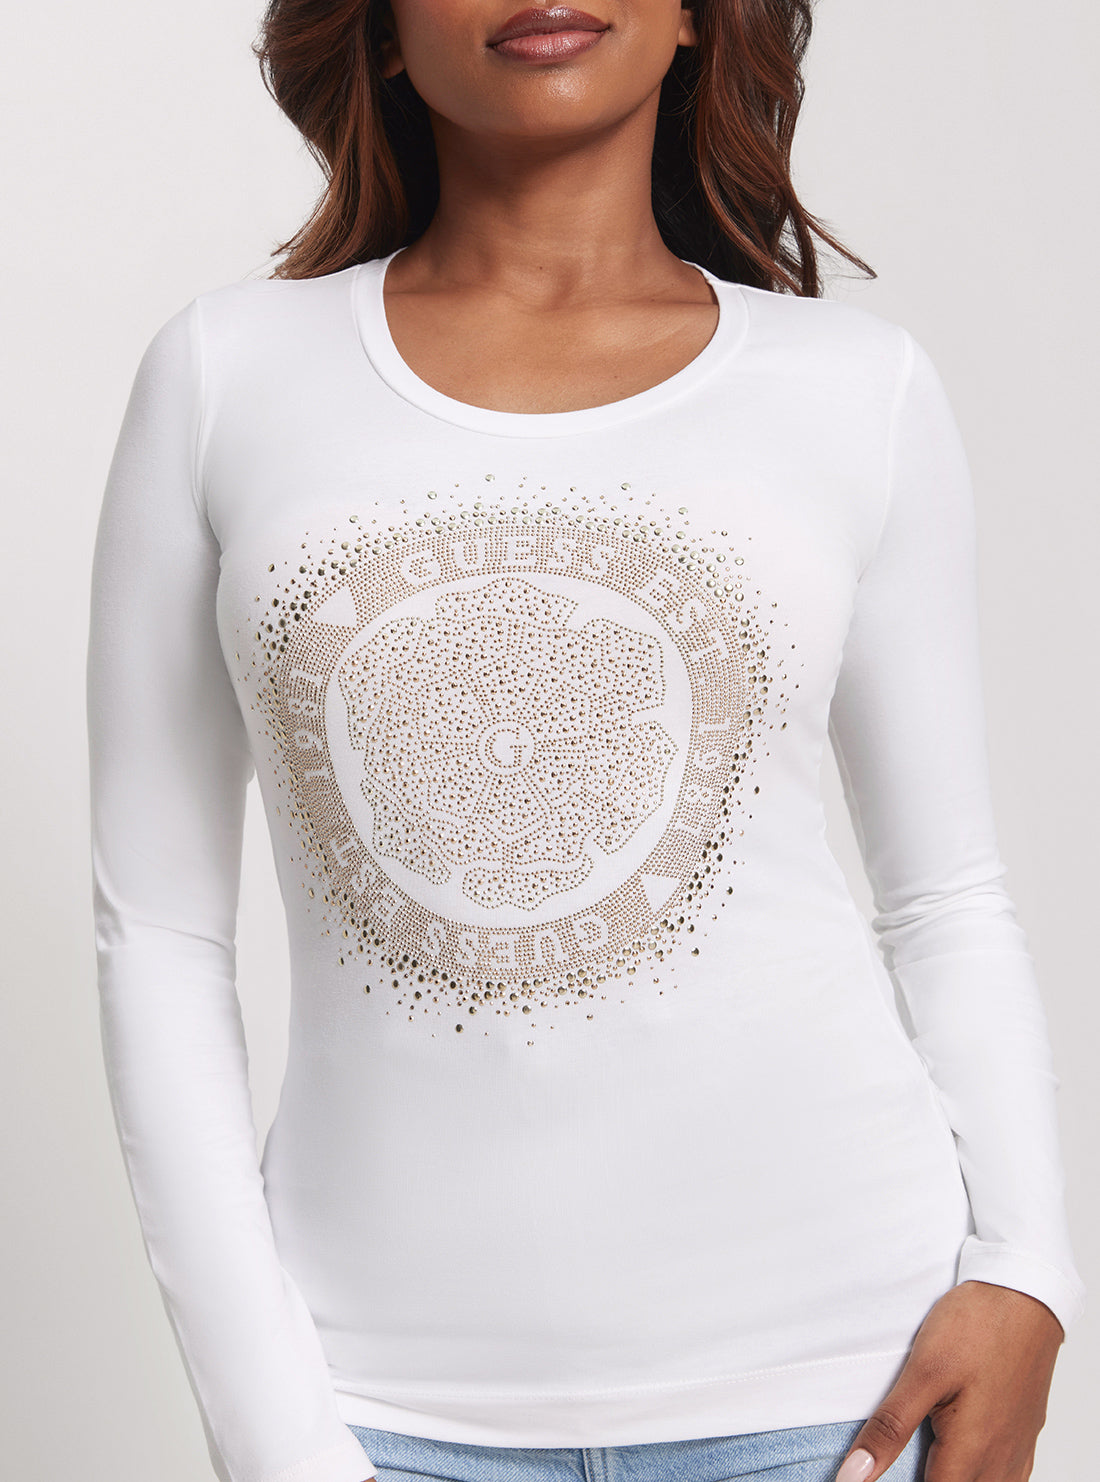 GUESS White Long Sleeve Camelia T-Shirt detail view